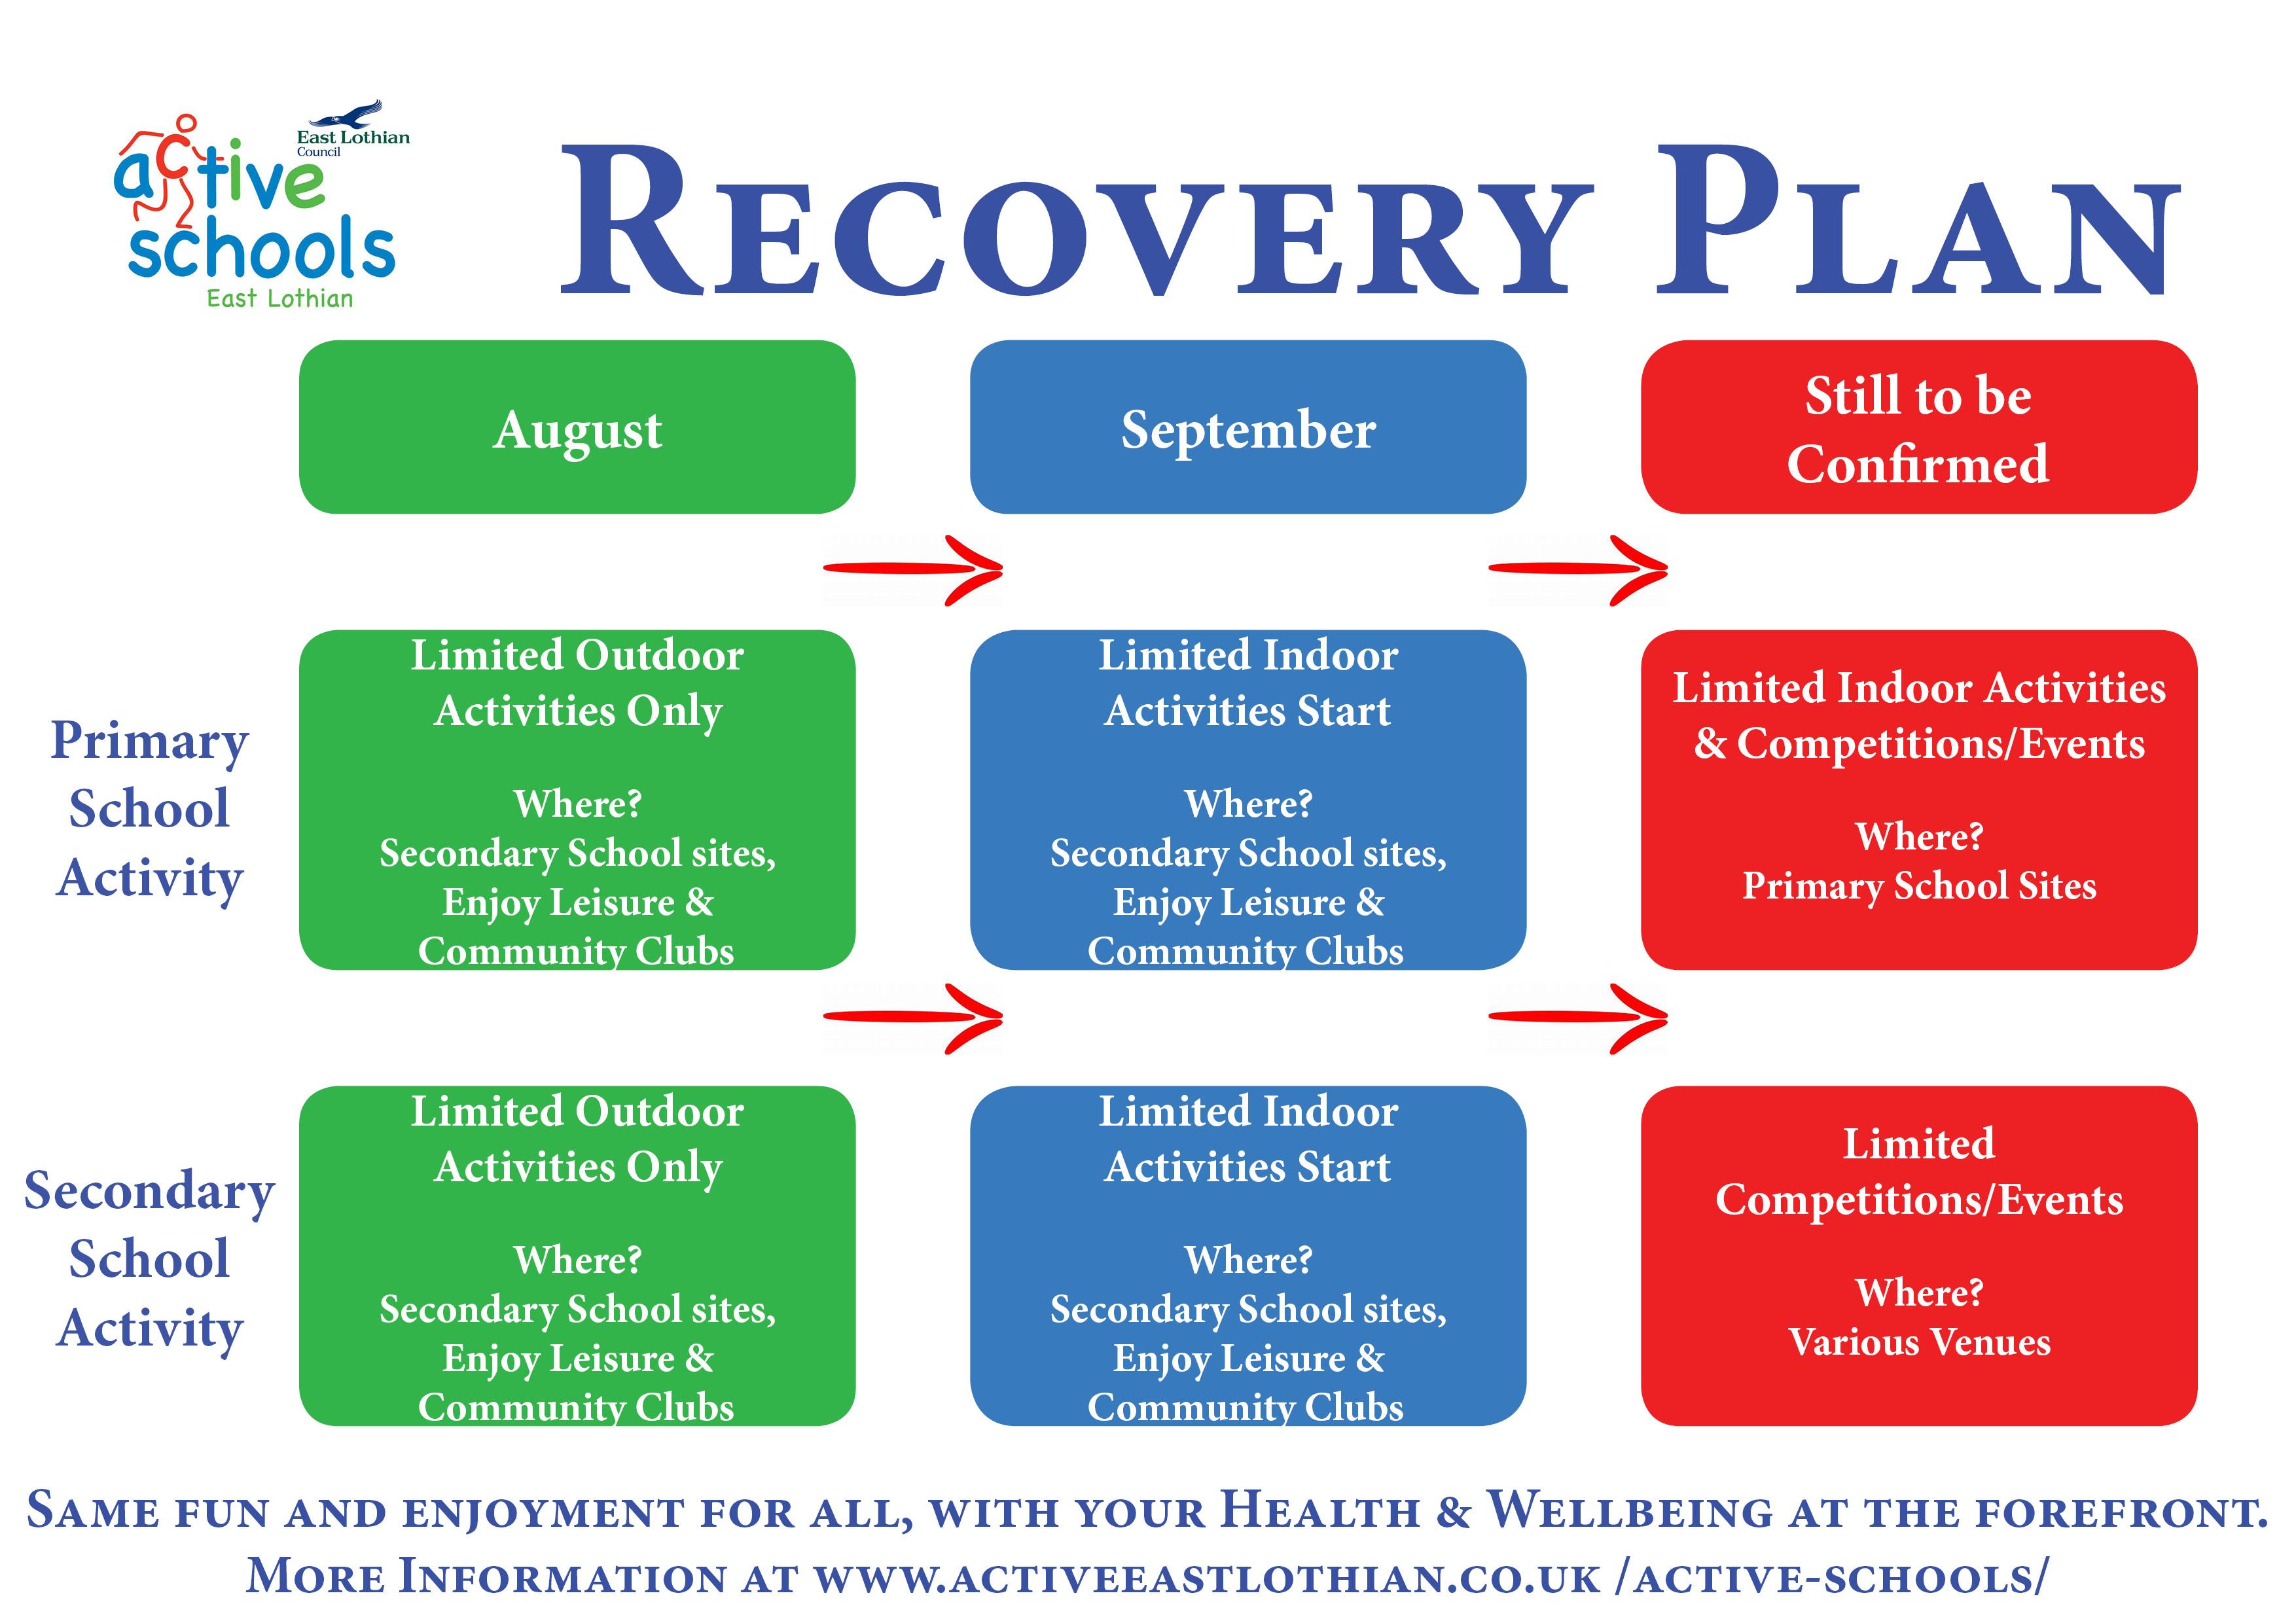 Active East Lothian Active Schools COVID19 Recovery Plan